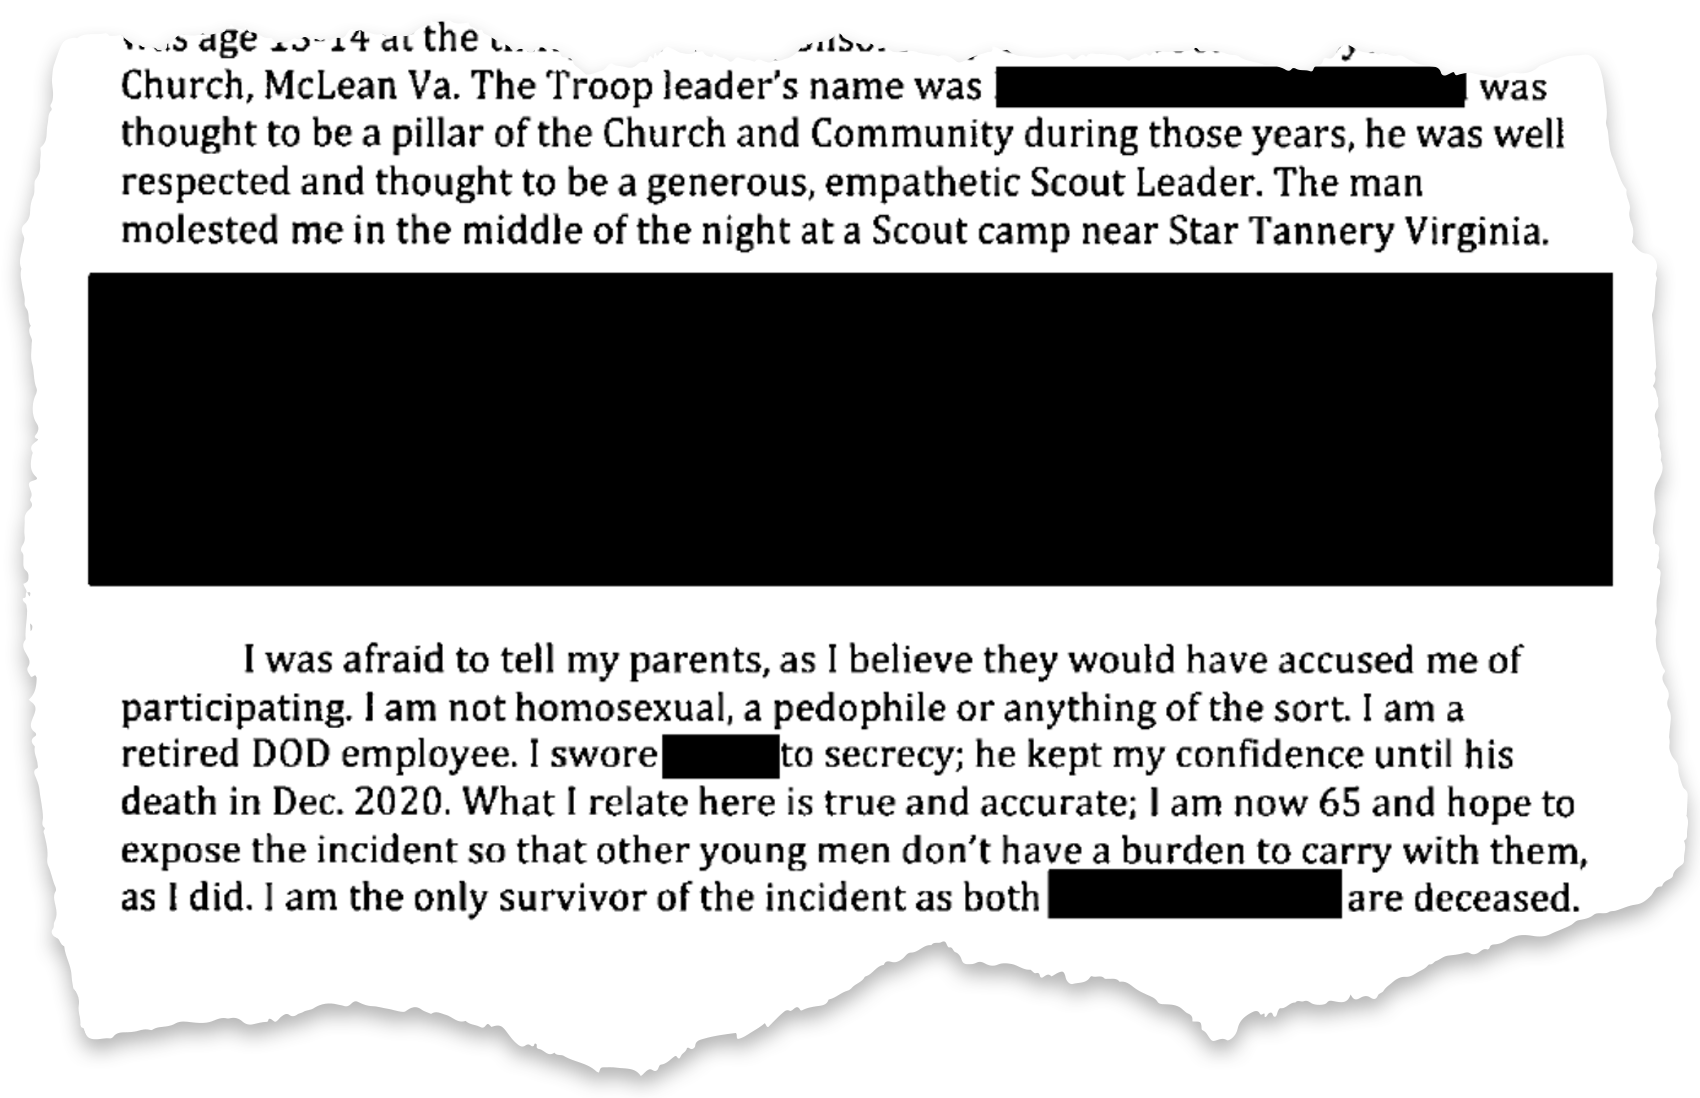 One of hundreds of letters sent to Judge Laurie Silverstein in the Boy Scouts bankruptcy case depicting stories of sexual abuse. Many of the graphic details have been redacted.